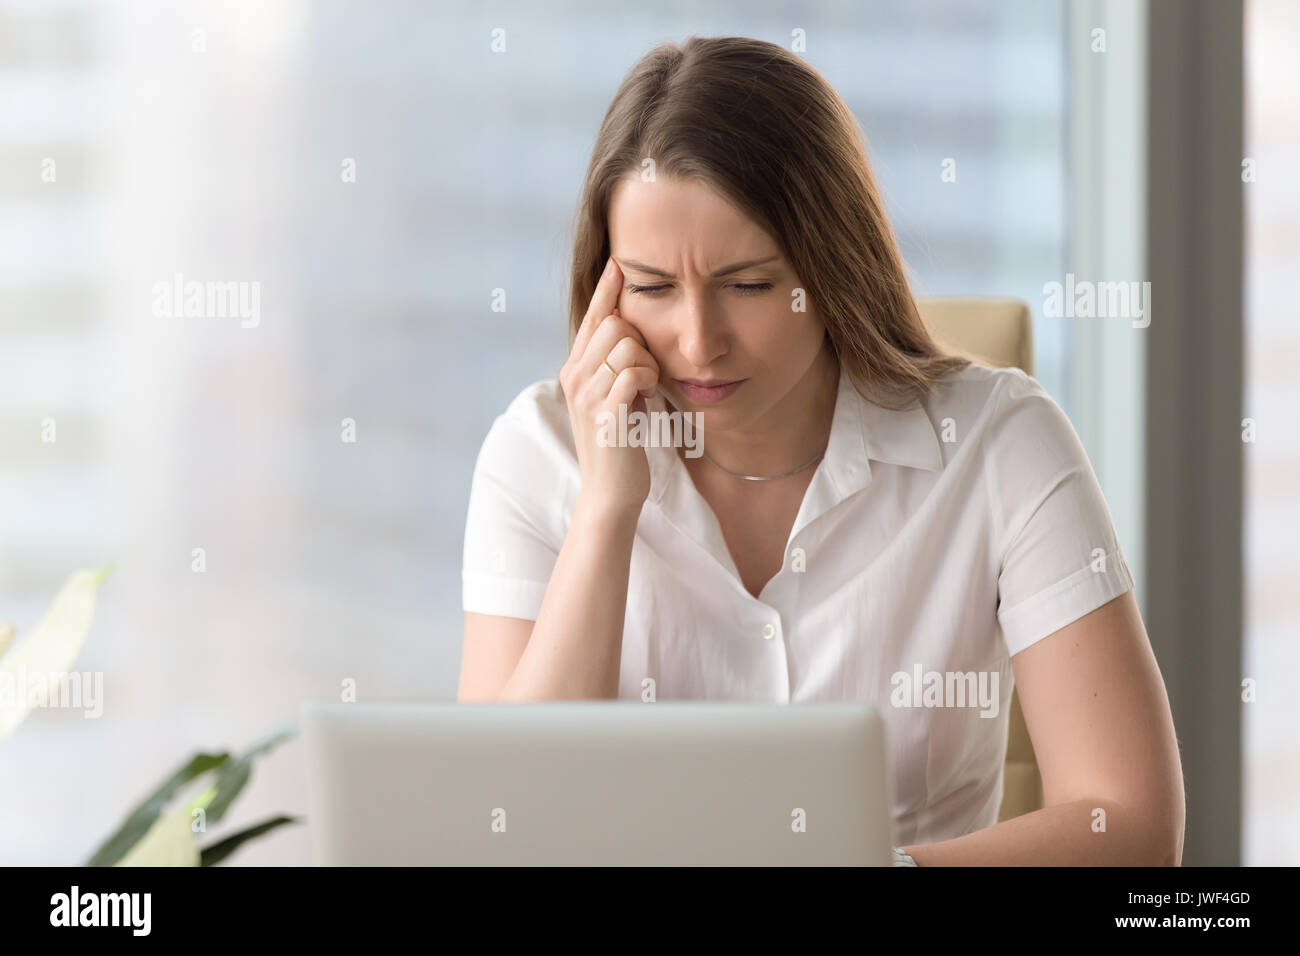 Shortsighted businesswoman squinting eyes looking at laptop scre Stock Photo